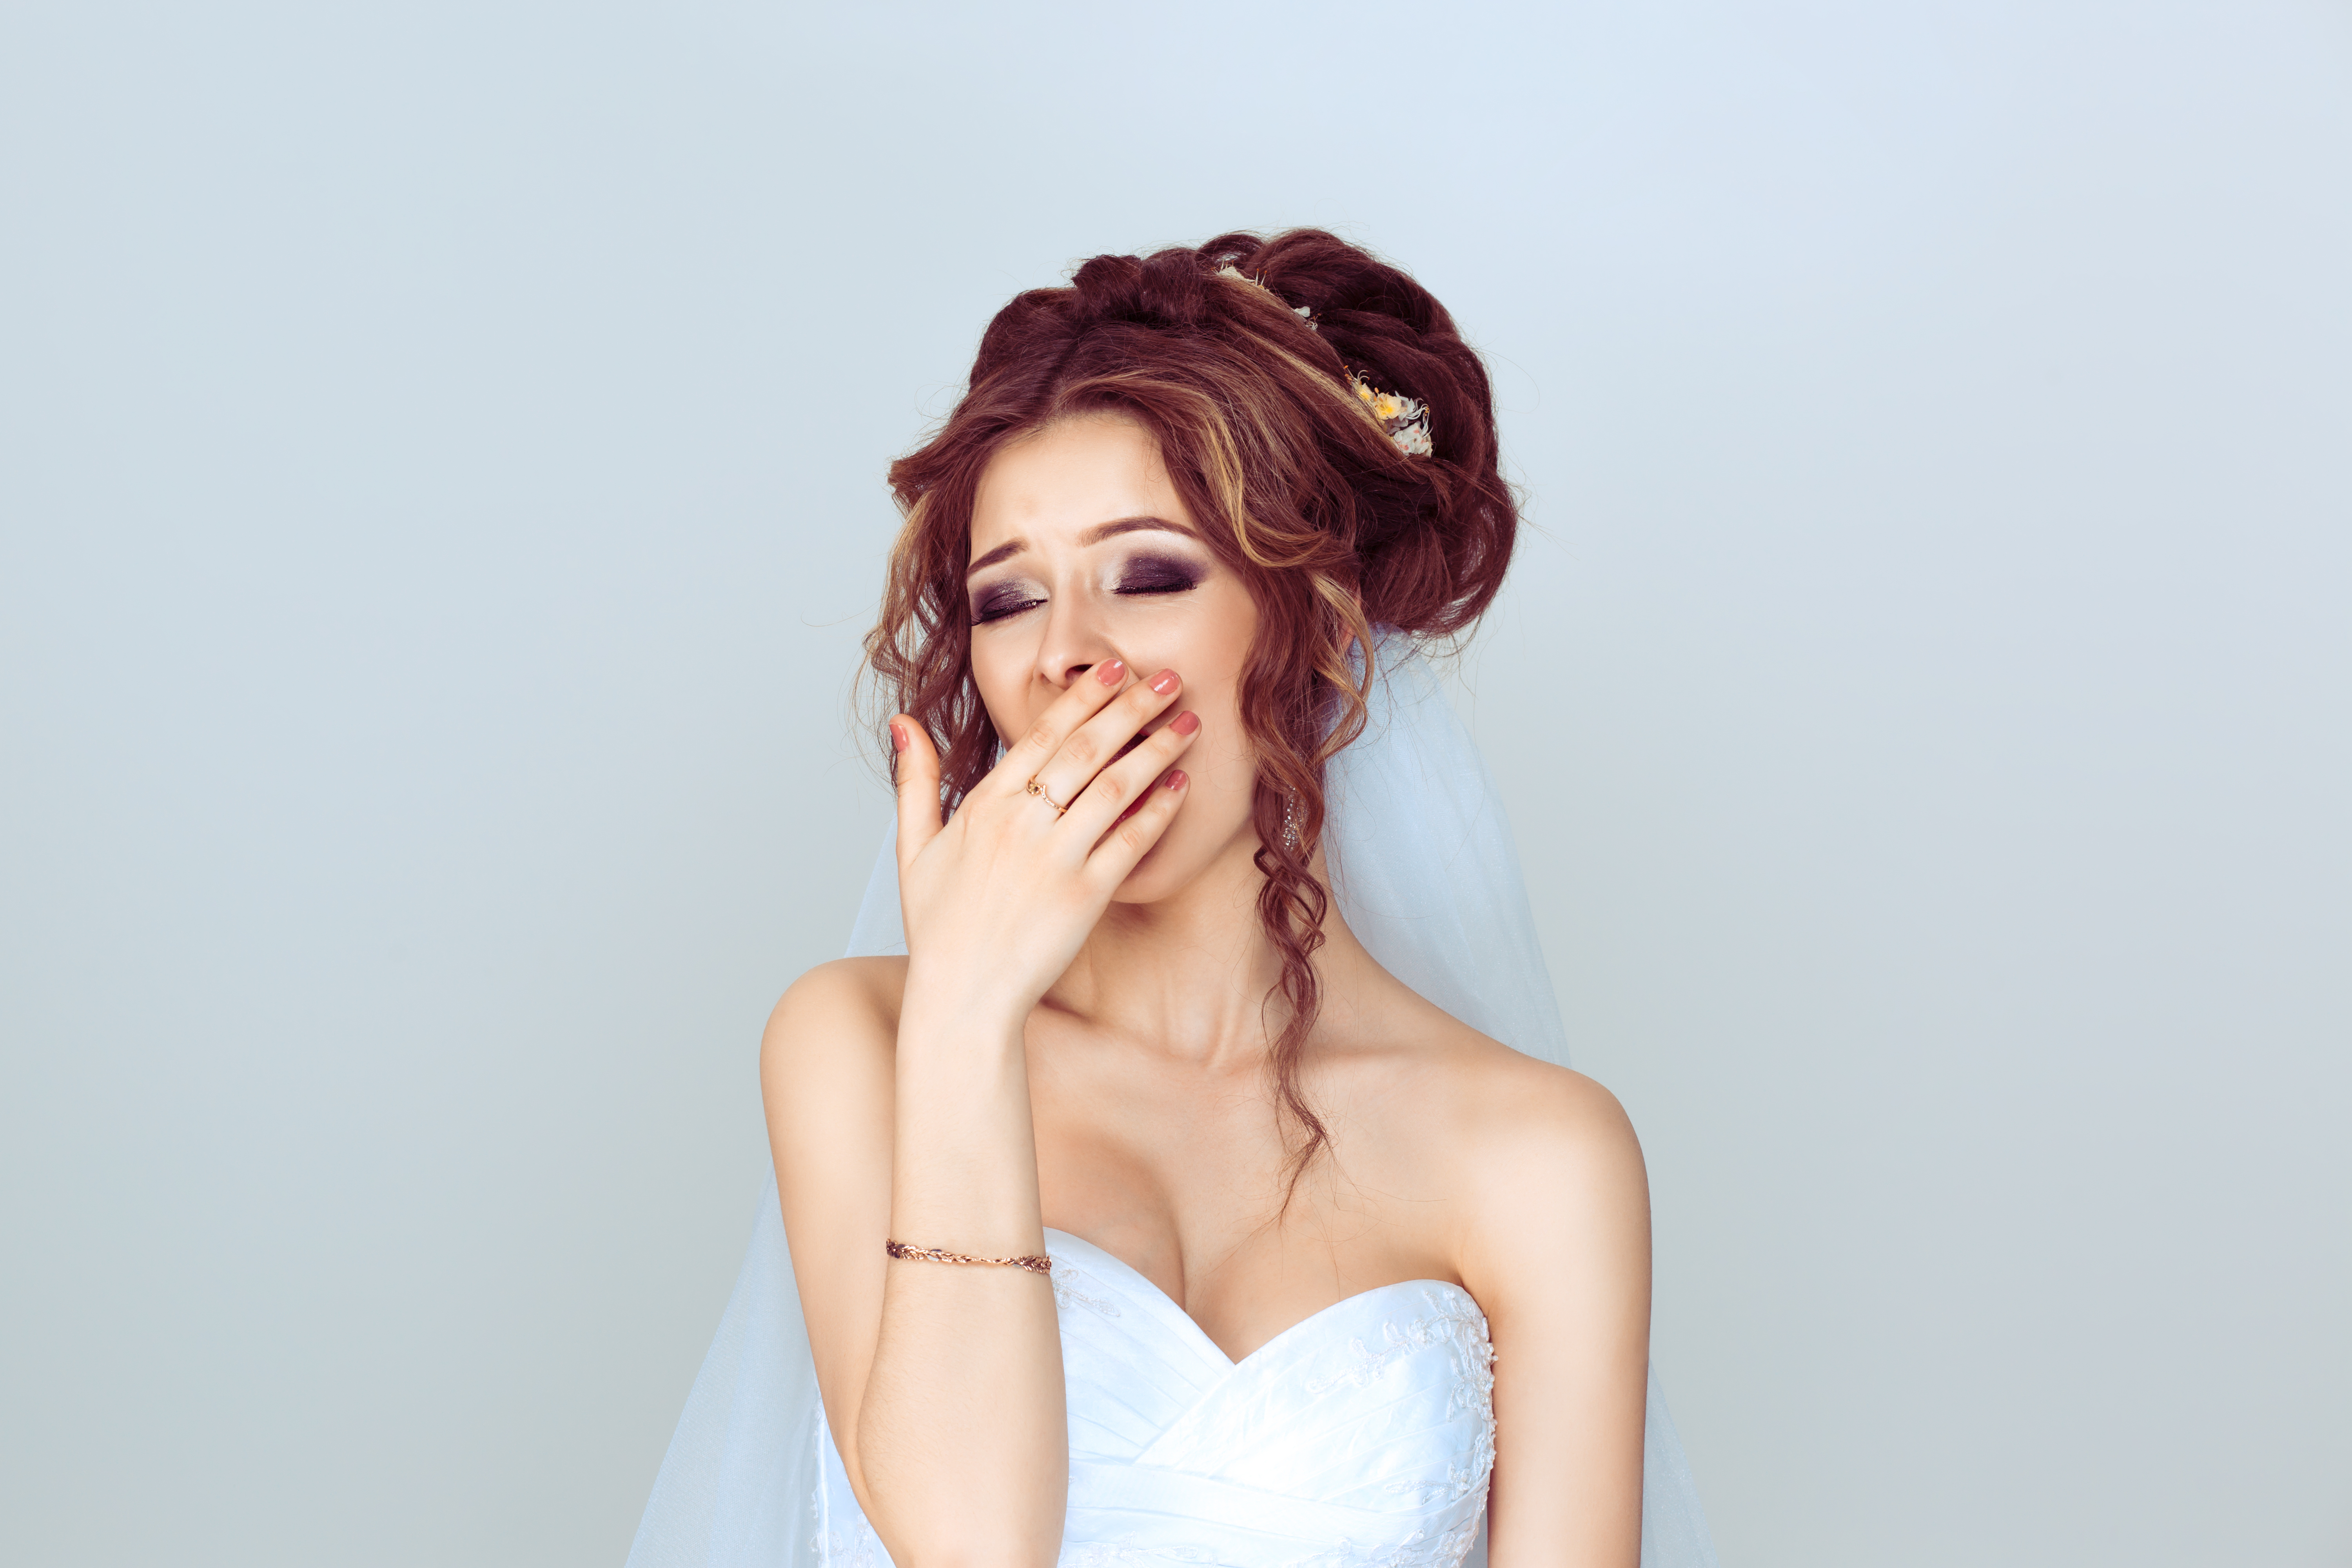 A bride covers her mouth while yawning | Source: Shutterstock